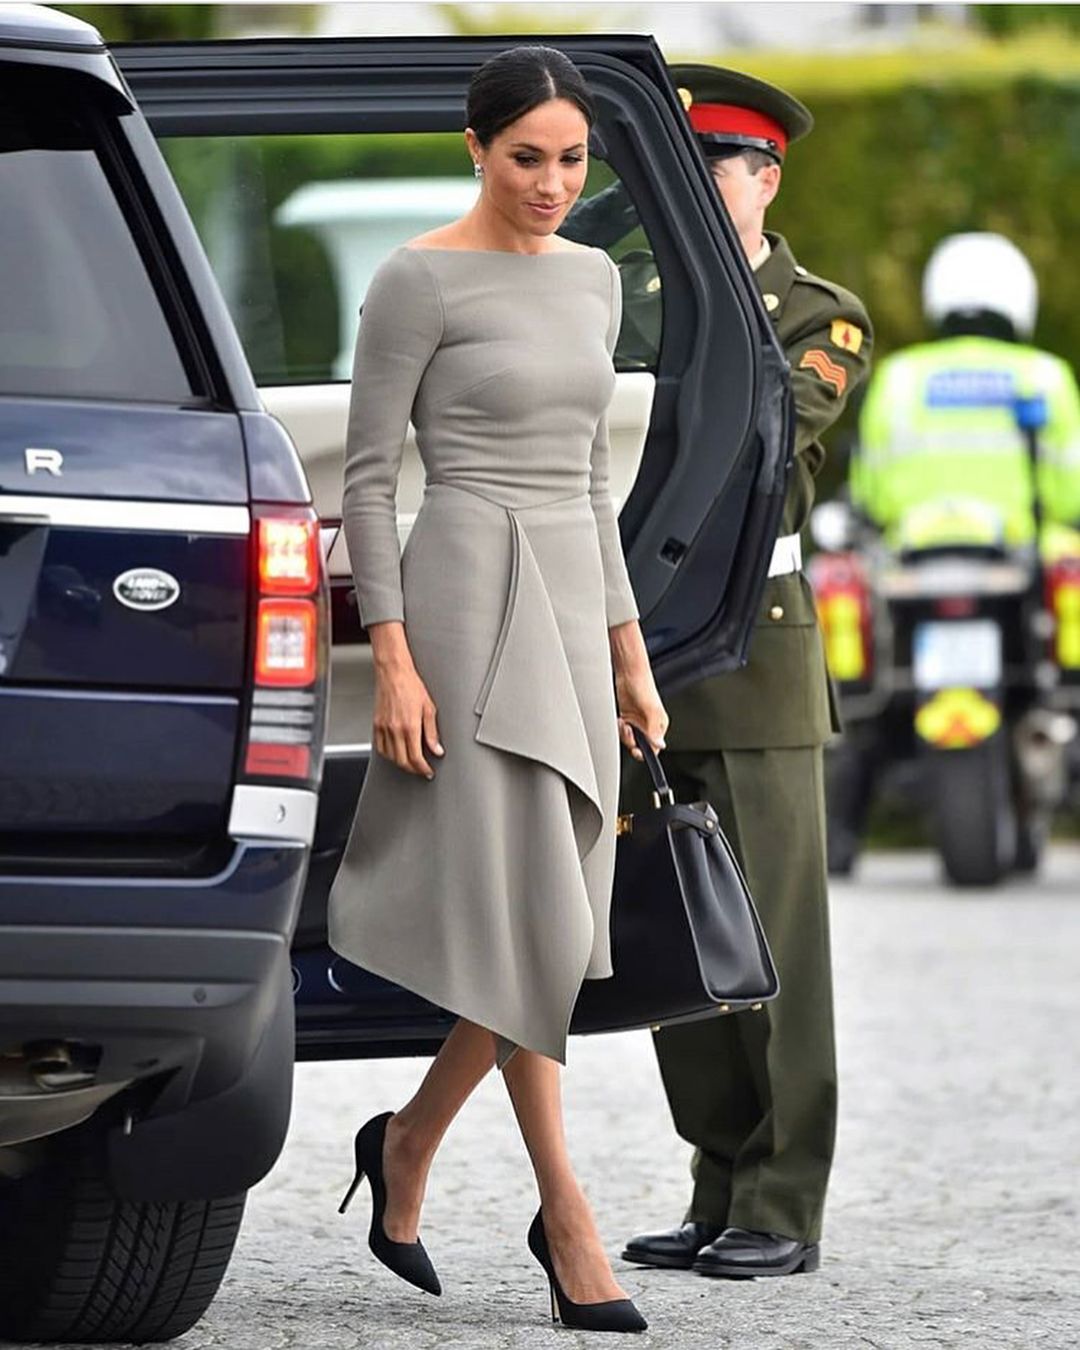 The Duchess wore a stylish grey dress with a bateau neckline and draping detail at an meeting